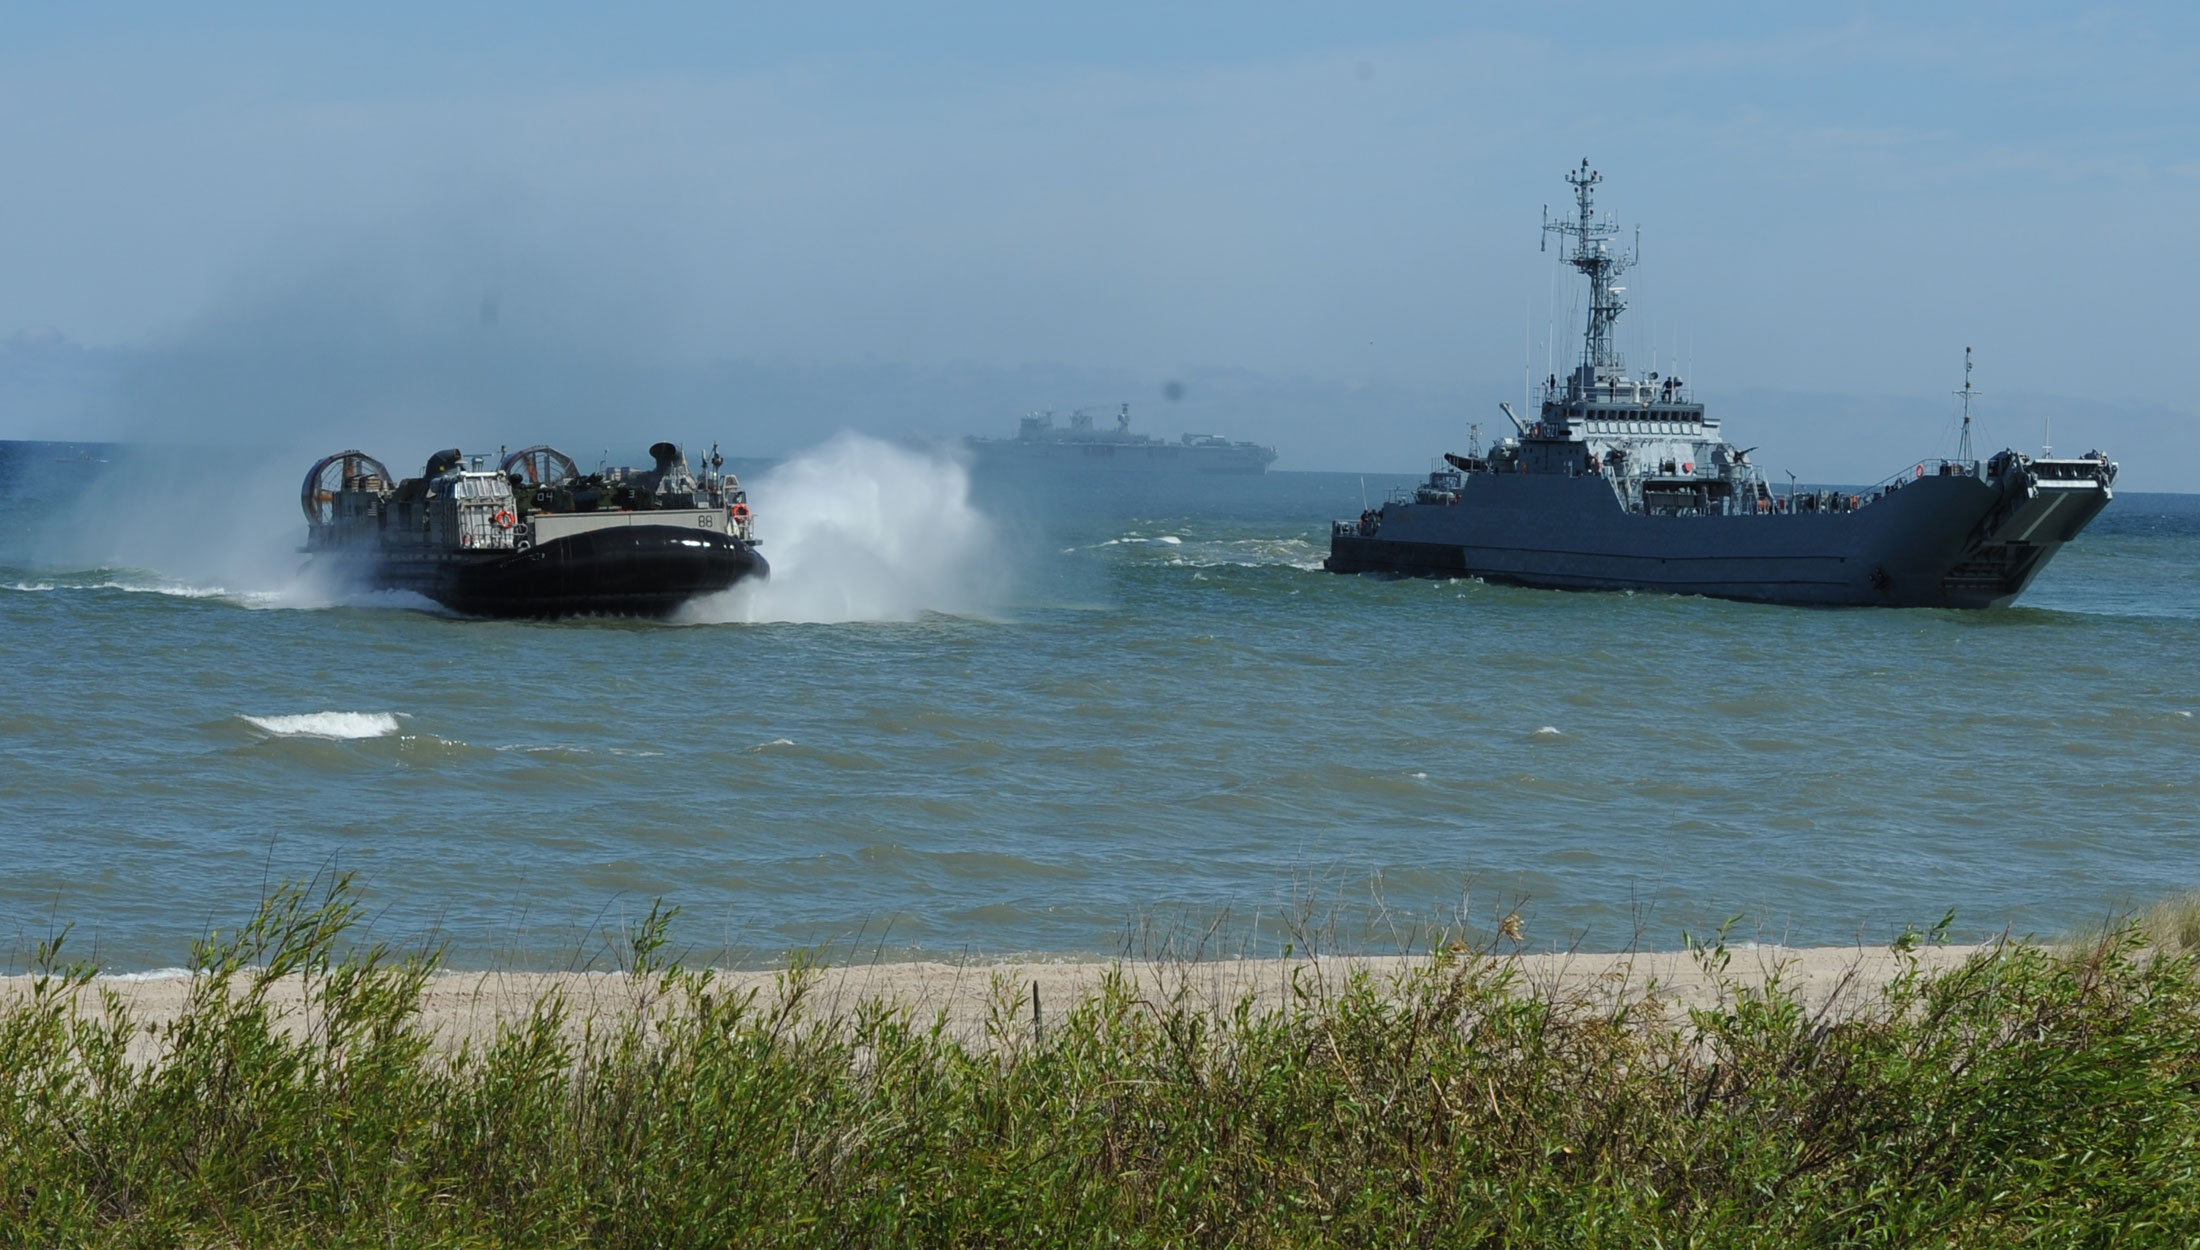 Allied forces practice amphibious assault near Ustka, northern Poland, on 17 June 2015 as part of BALTOPS 2015. NATO Photo